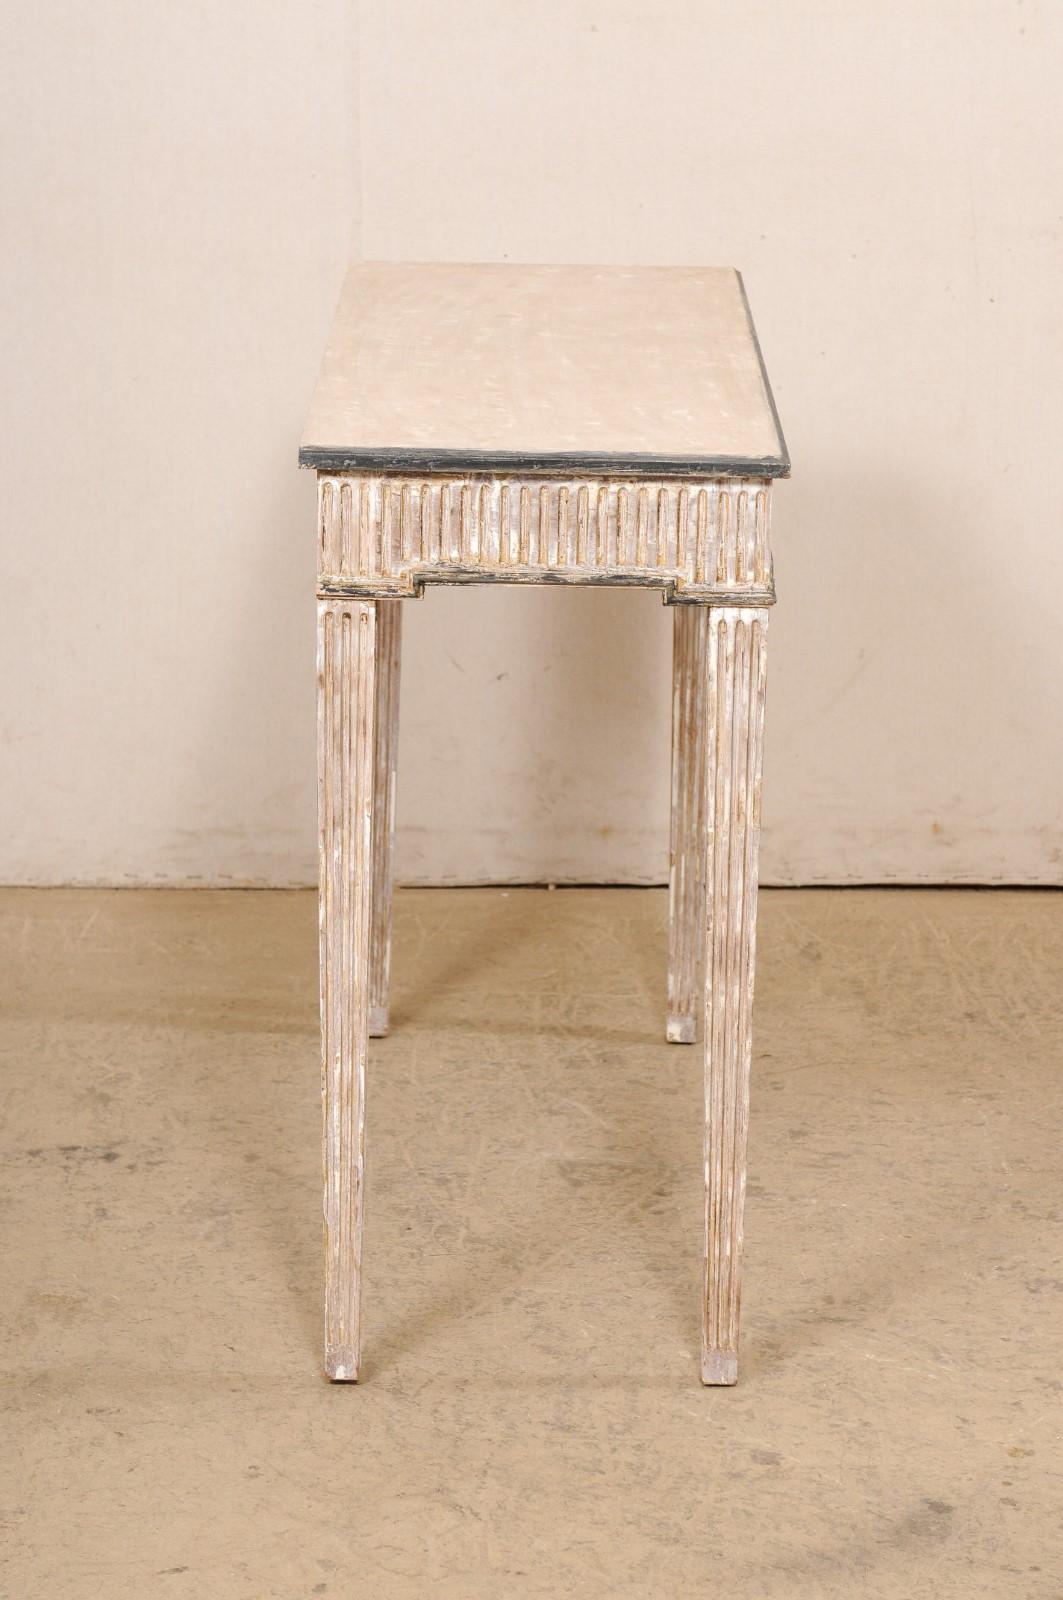 20th Century A Slender Italian Console Table Embellished w/Fluted Carvings, Mid 20th C. For Sale